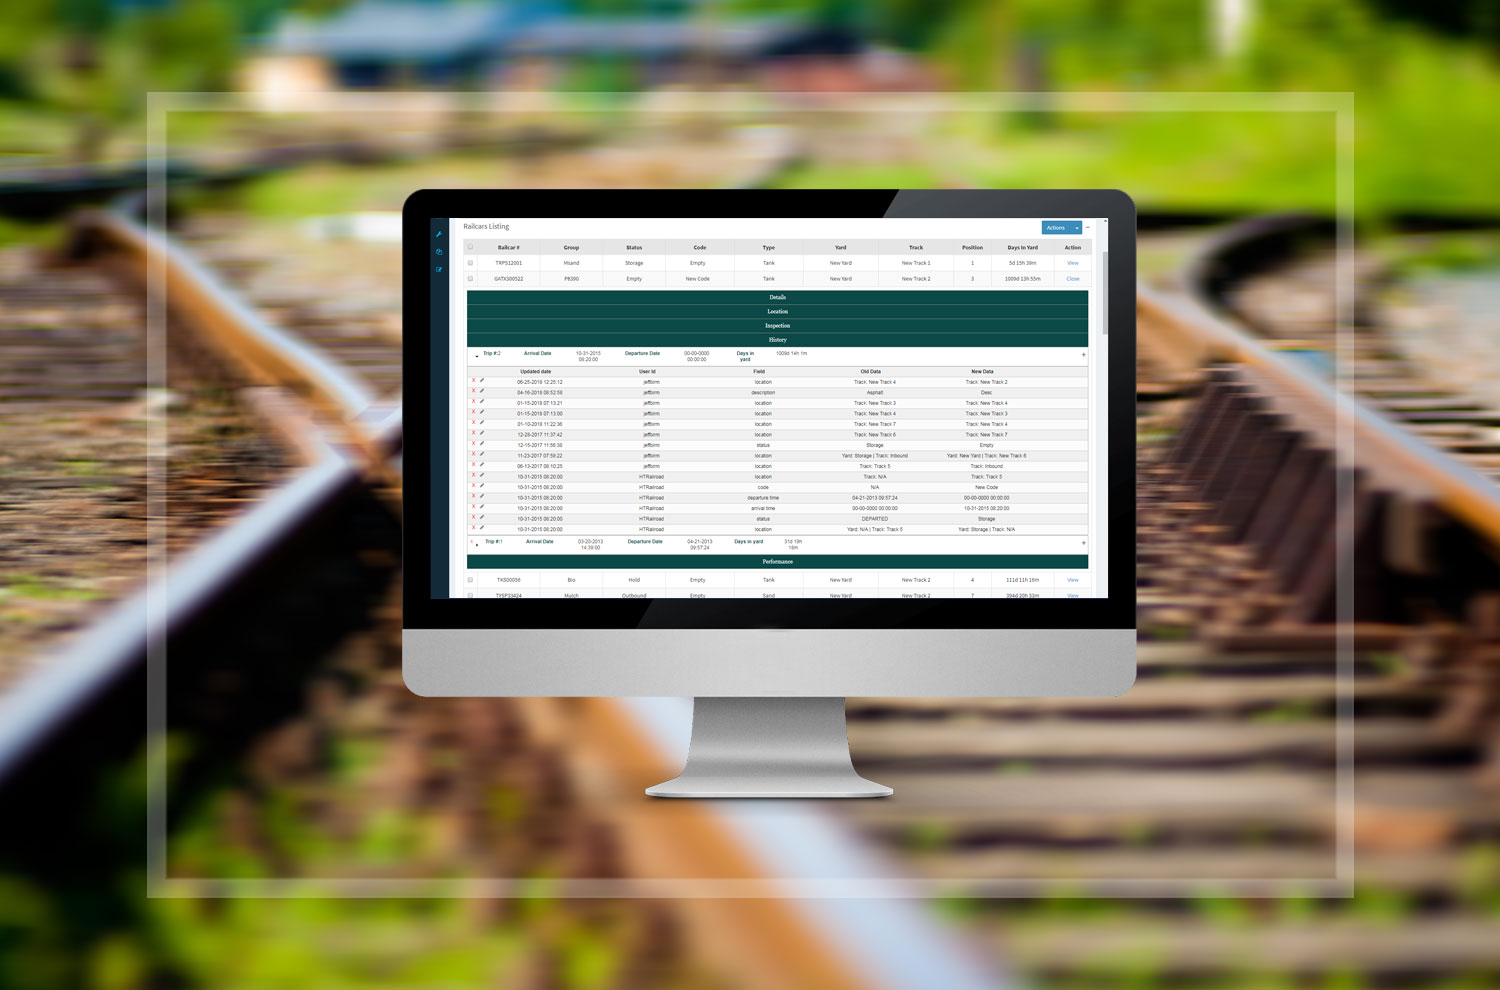 Railcar Historical Tracking gives administrators visibility into the actions of their employees and a view of the whole life cycle in a railcar facility within a trip